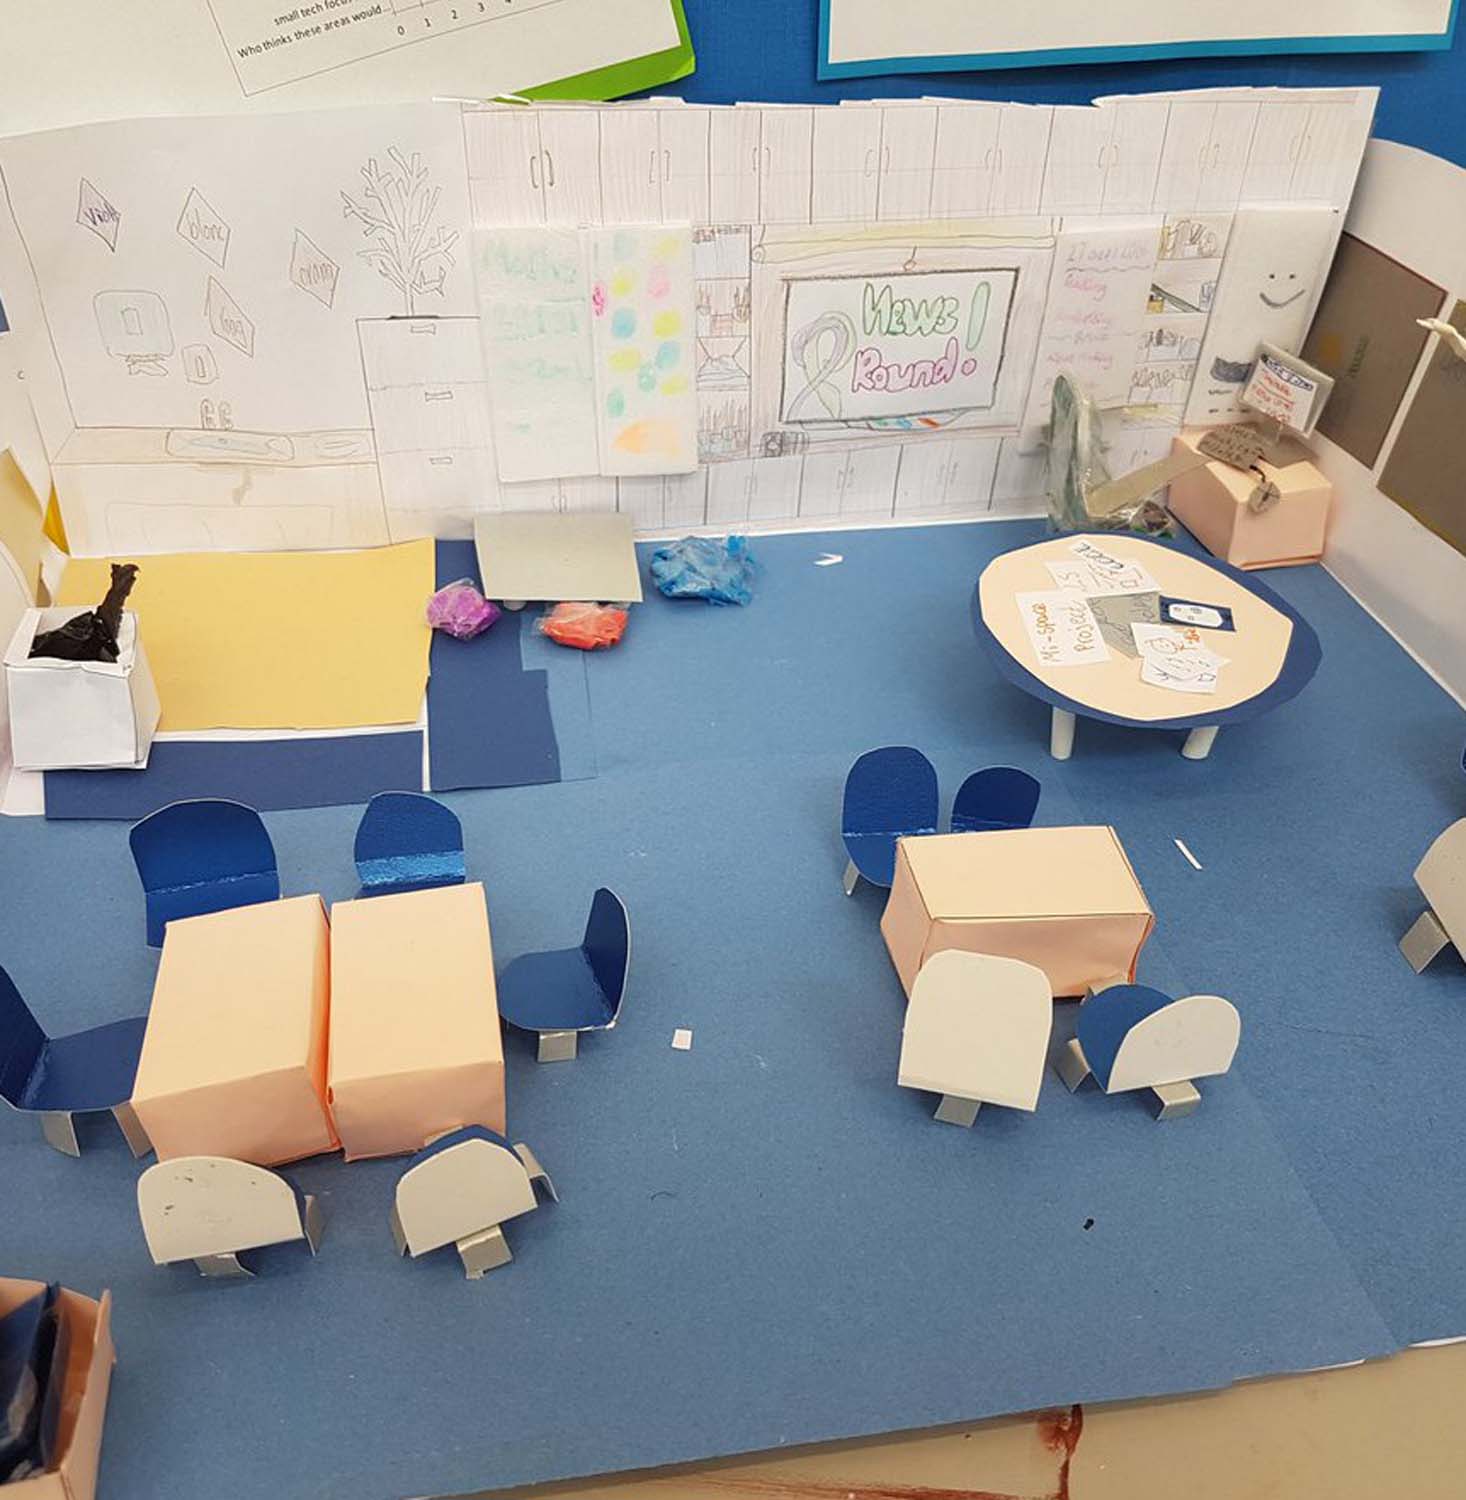 A model of a classroom made by school pupils showing different seating arrangements and children's artwork on the walls